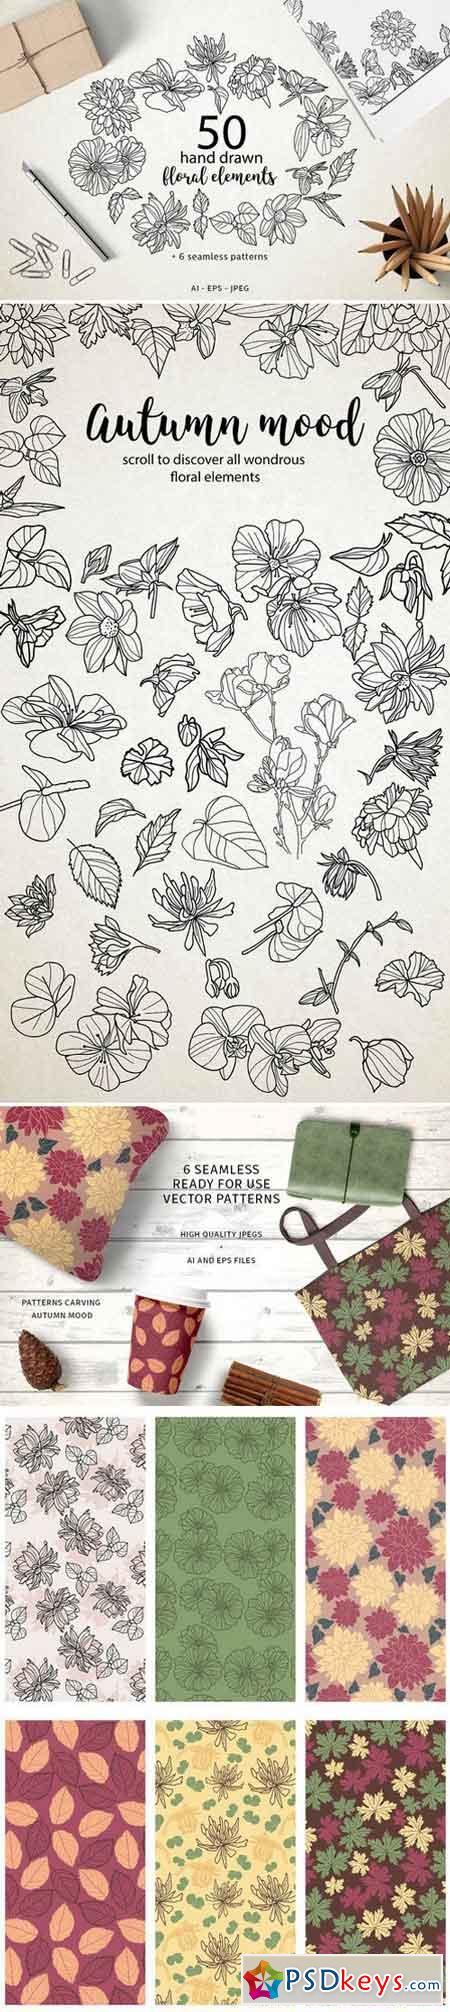 50 hand drawn floral elements 1991307